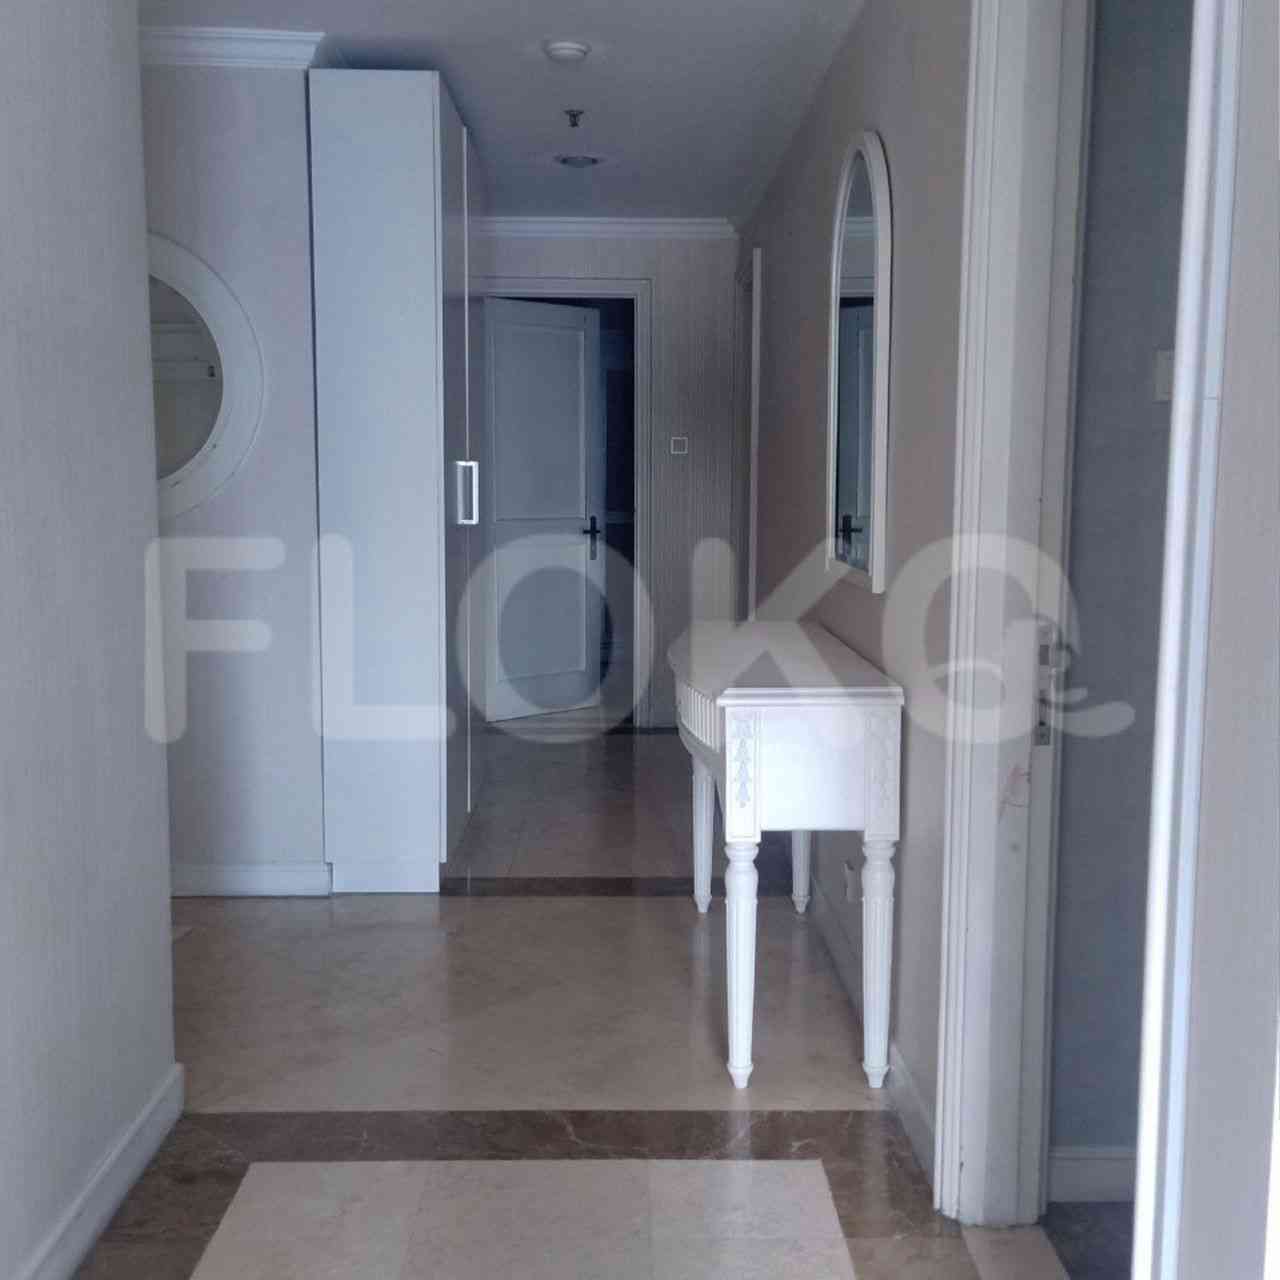 3 Bedroom on 15th Floor for Rent in Casablanca Apartment - ftebd9 2